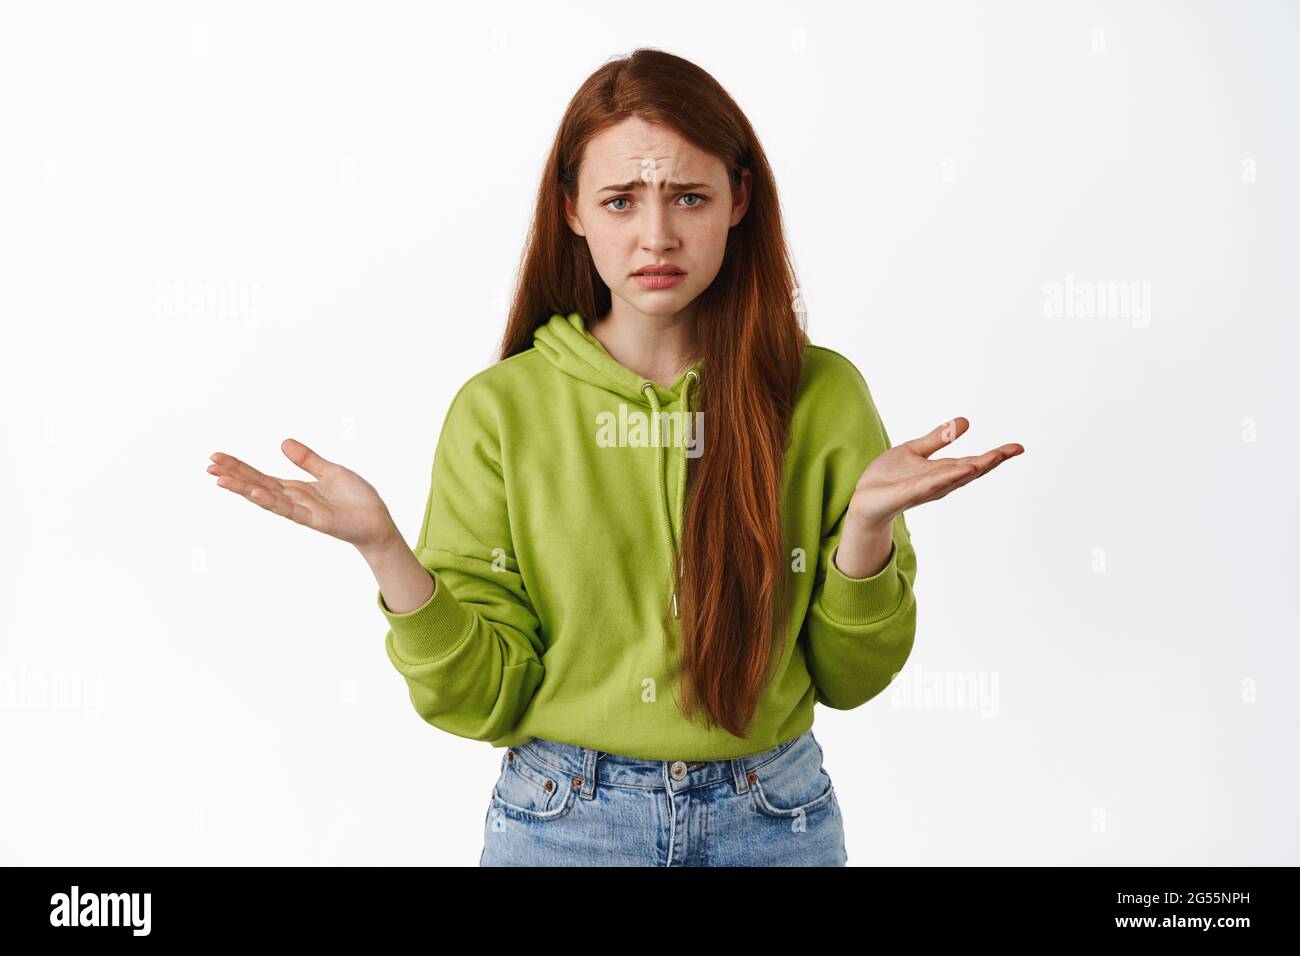 Portrait Of Confused Redhead Girl Asking Whats Wrong Cant Understand Something Looking